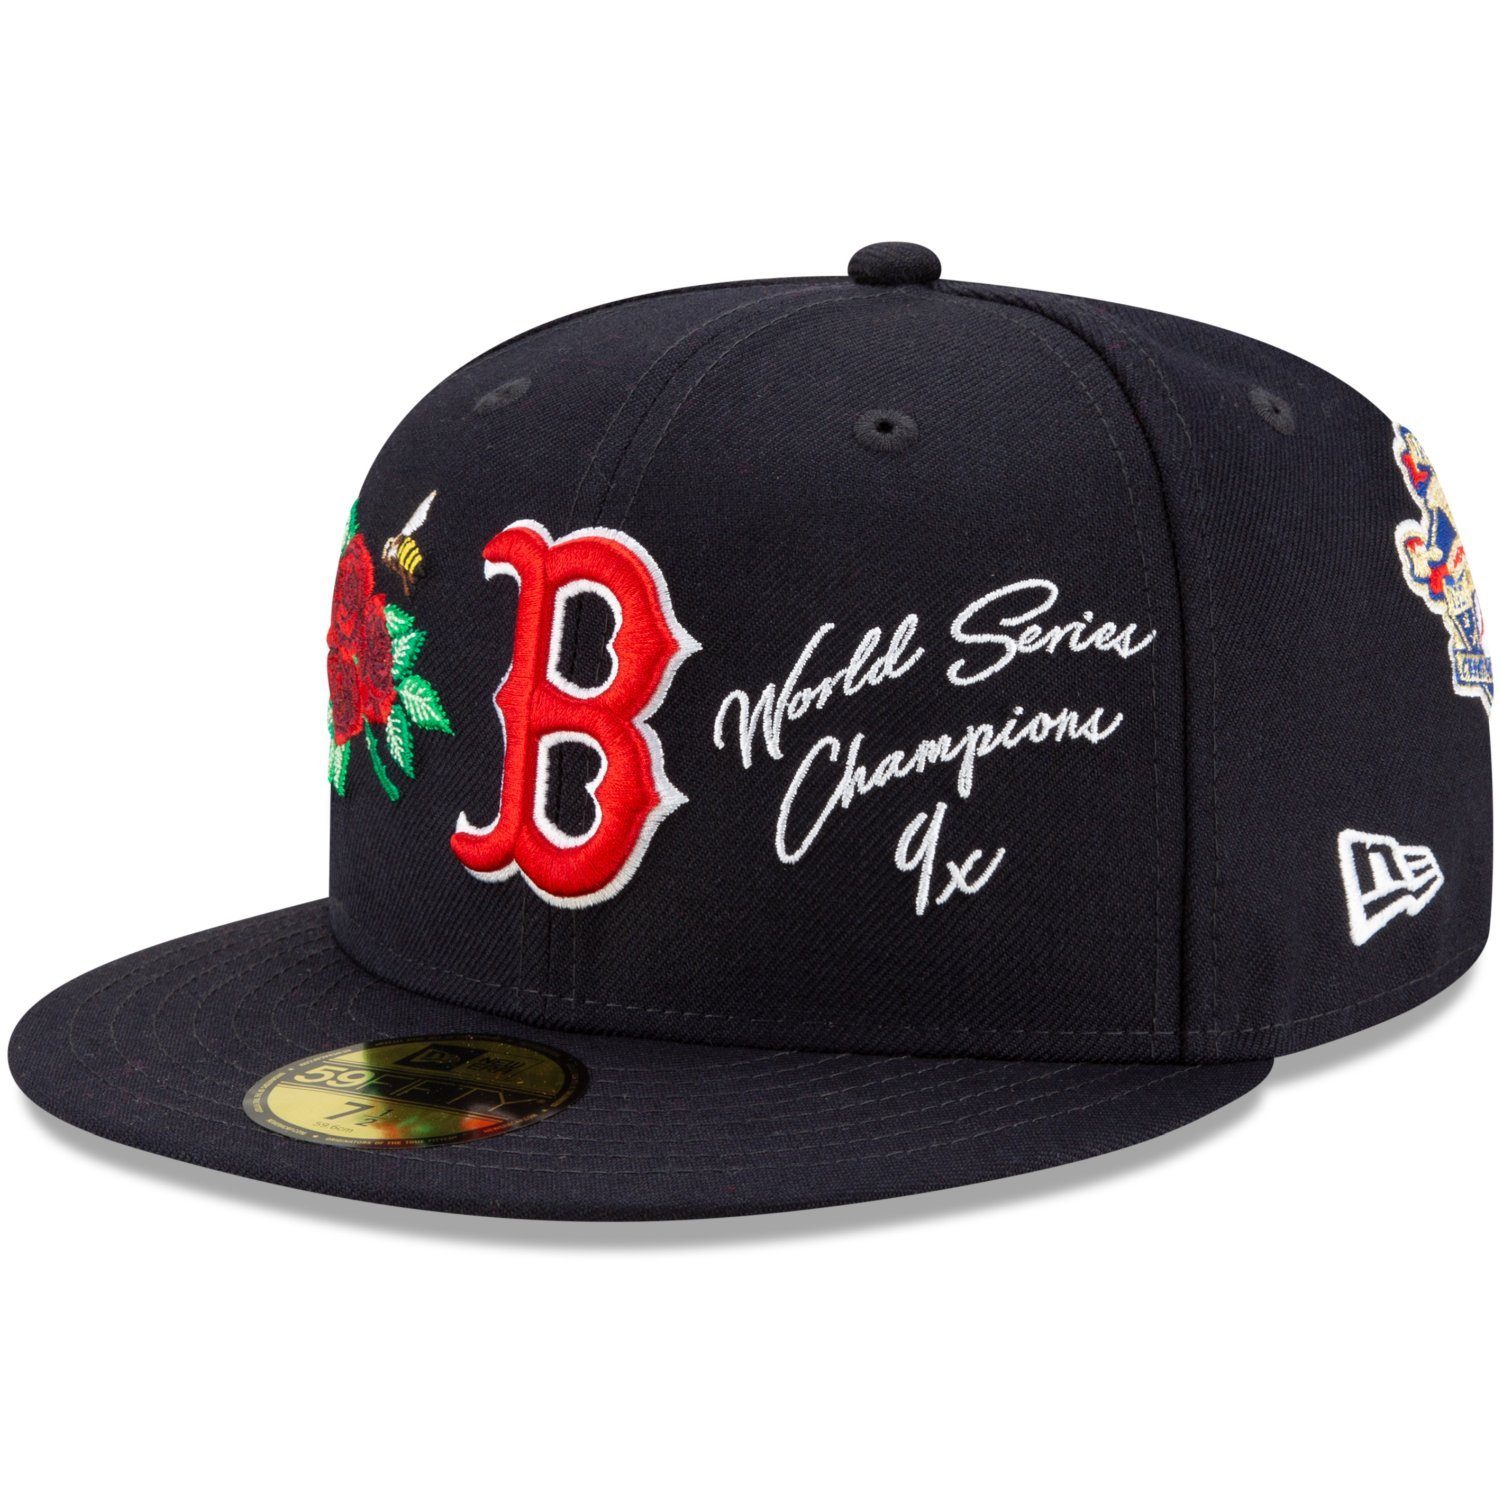 Era GRAPHIC Boston Fitted Cap 59Fifty New Sox Red